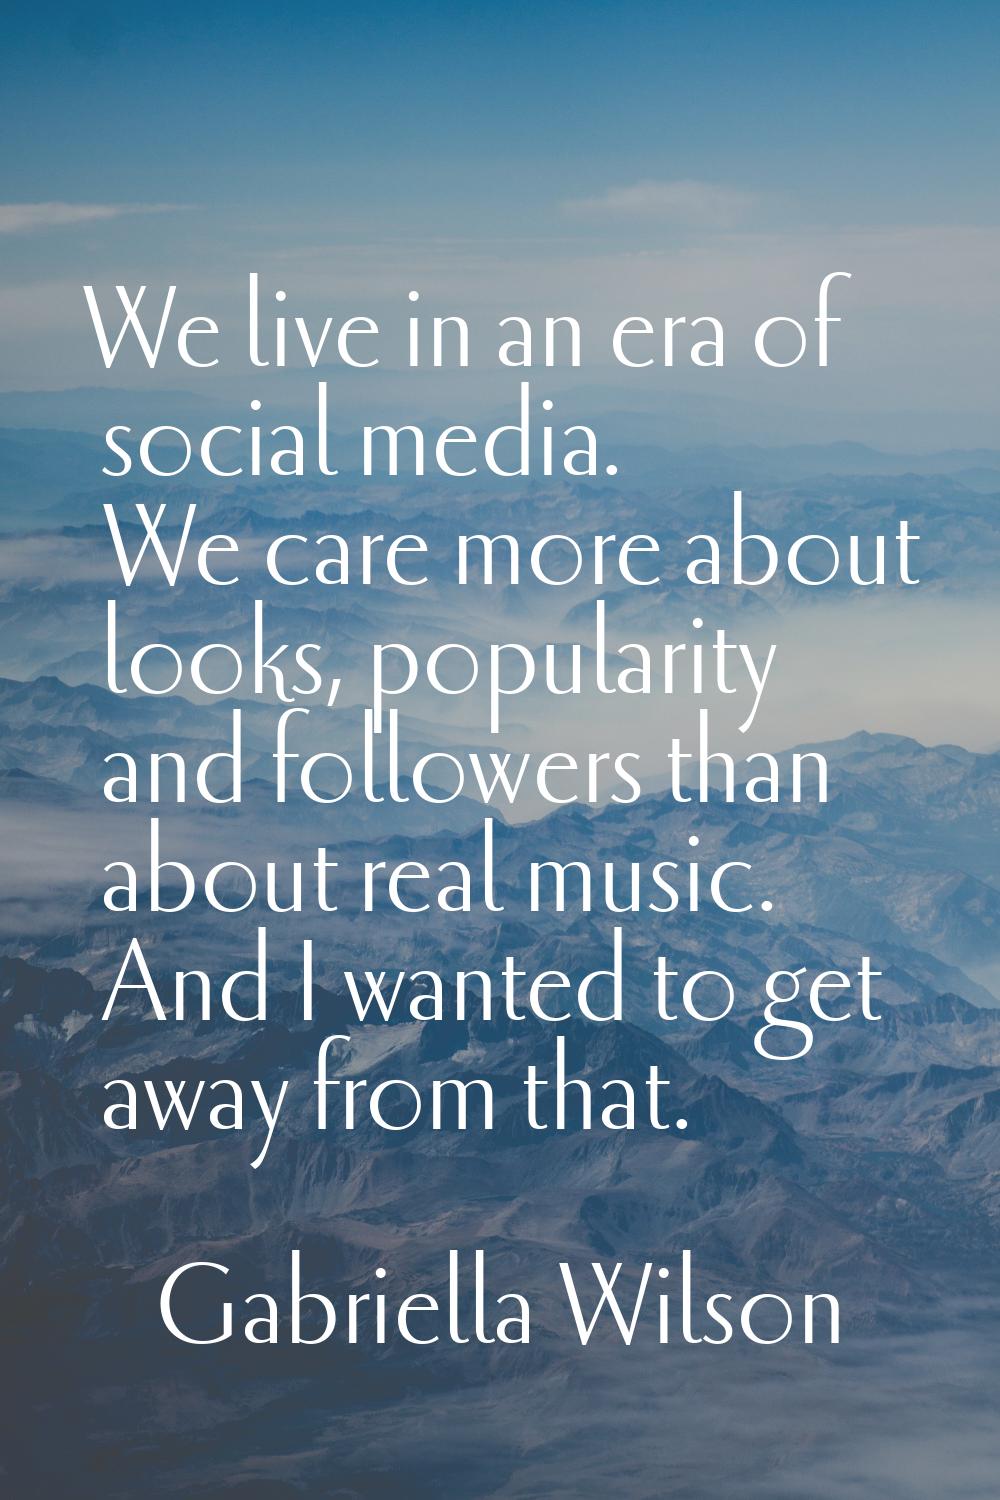 We live in an era of social media. We care more about looks, popularity and followers than about re